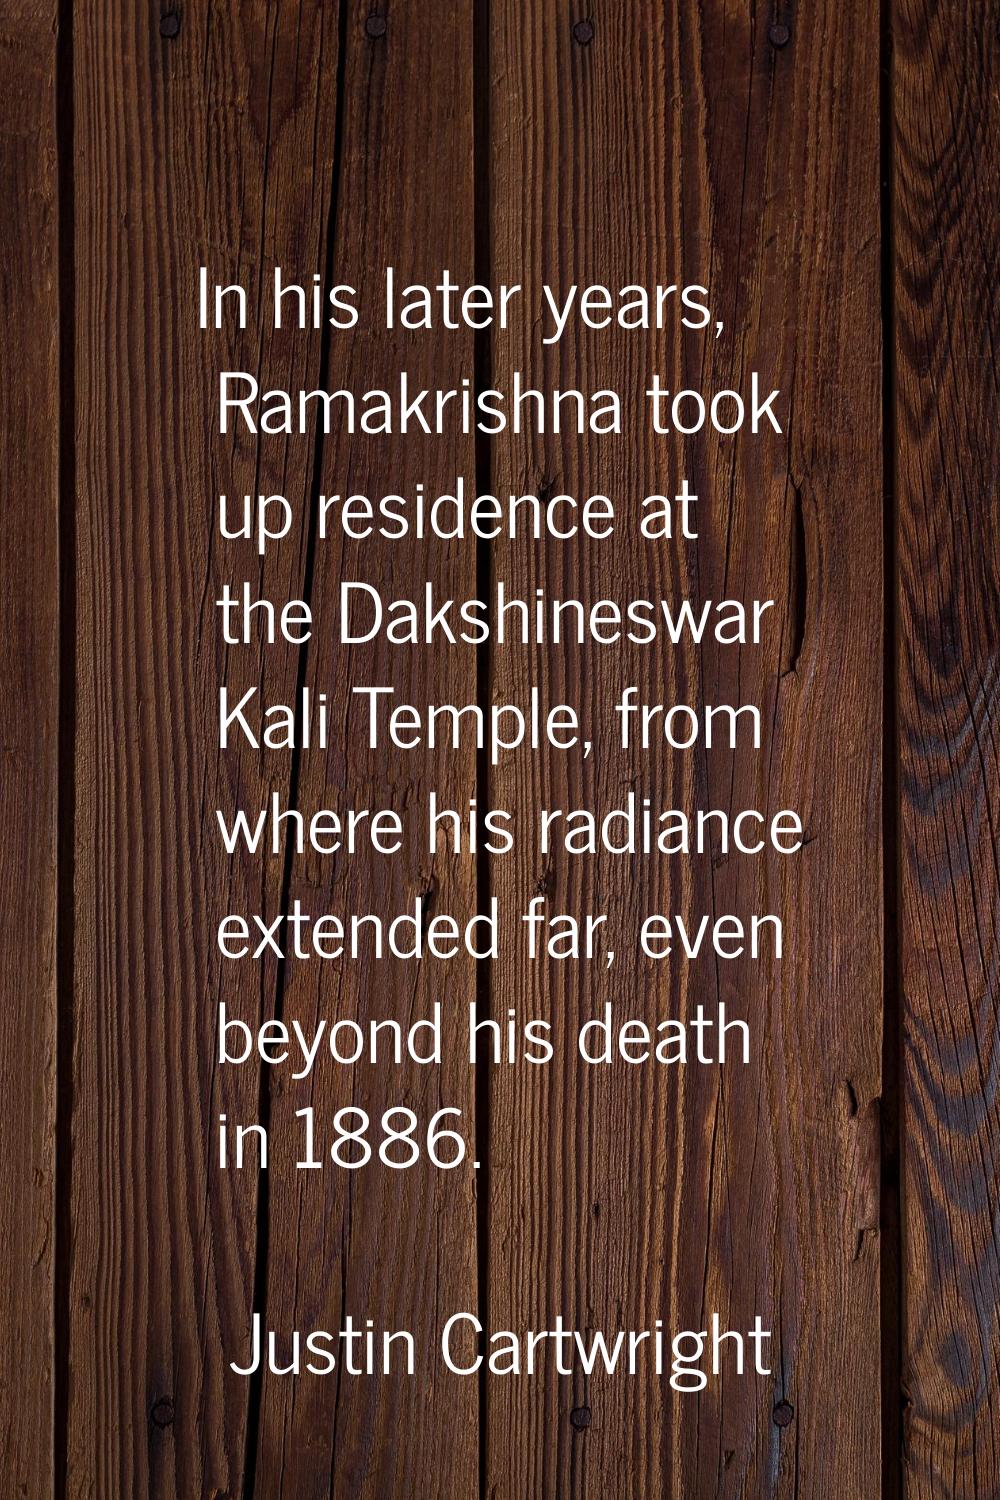 In his later years, Ramakrishna took up residence at the Dakshineswar Kali Temple, from where his r